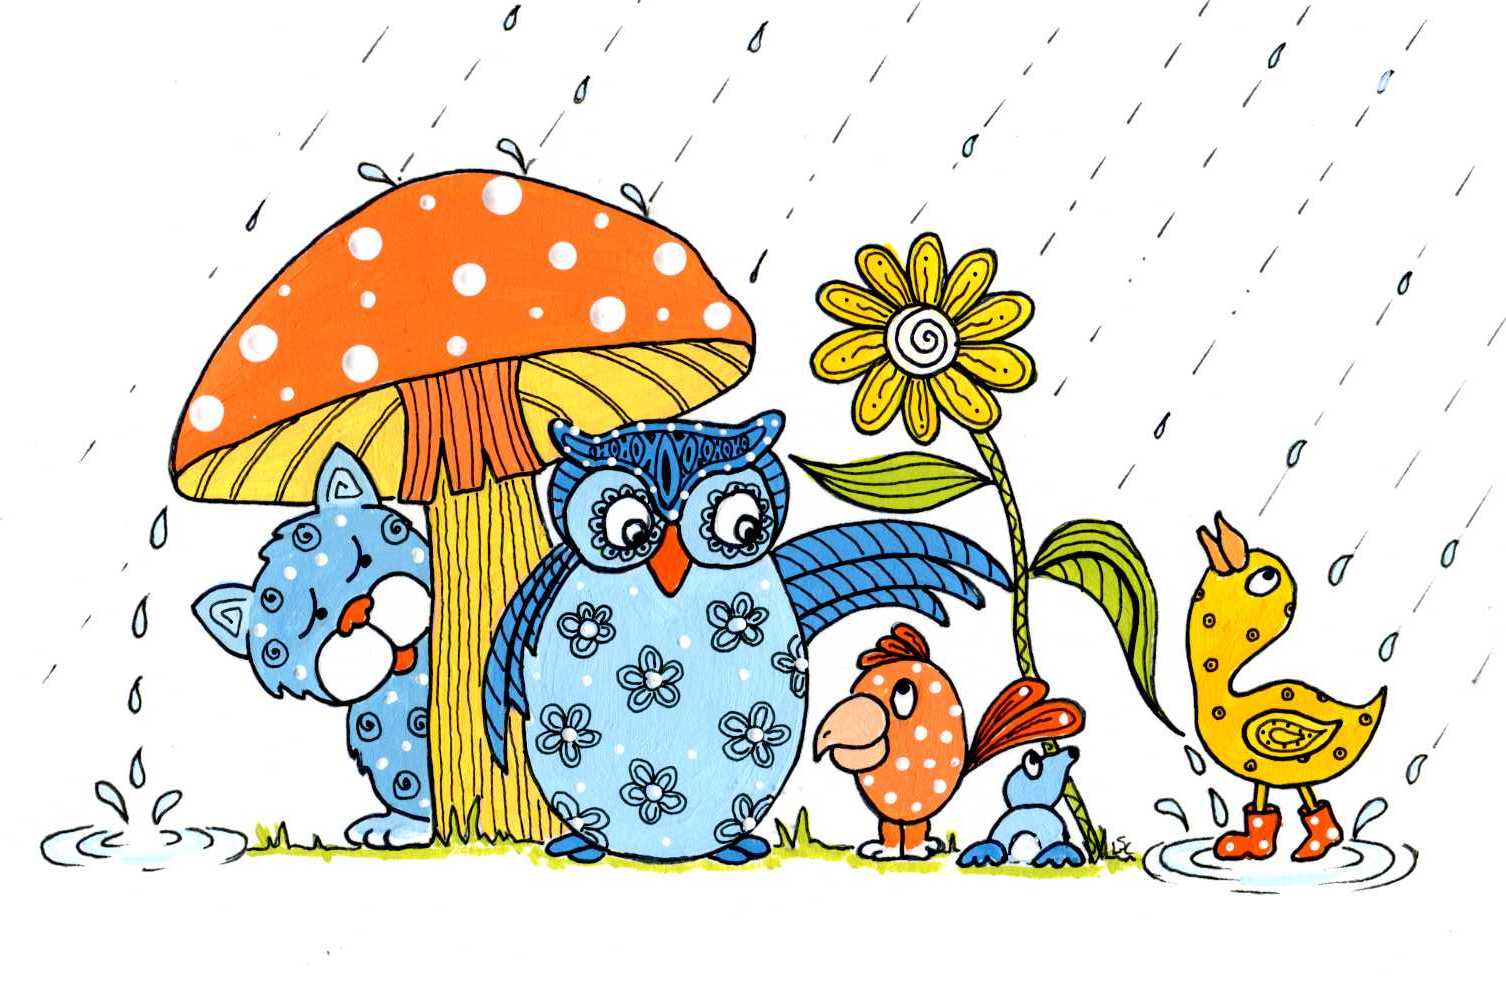 Go Check Out Other April Showers From Tuesday Onwards Over On Mr T S